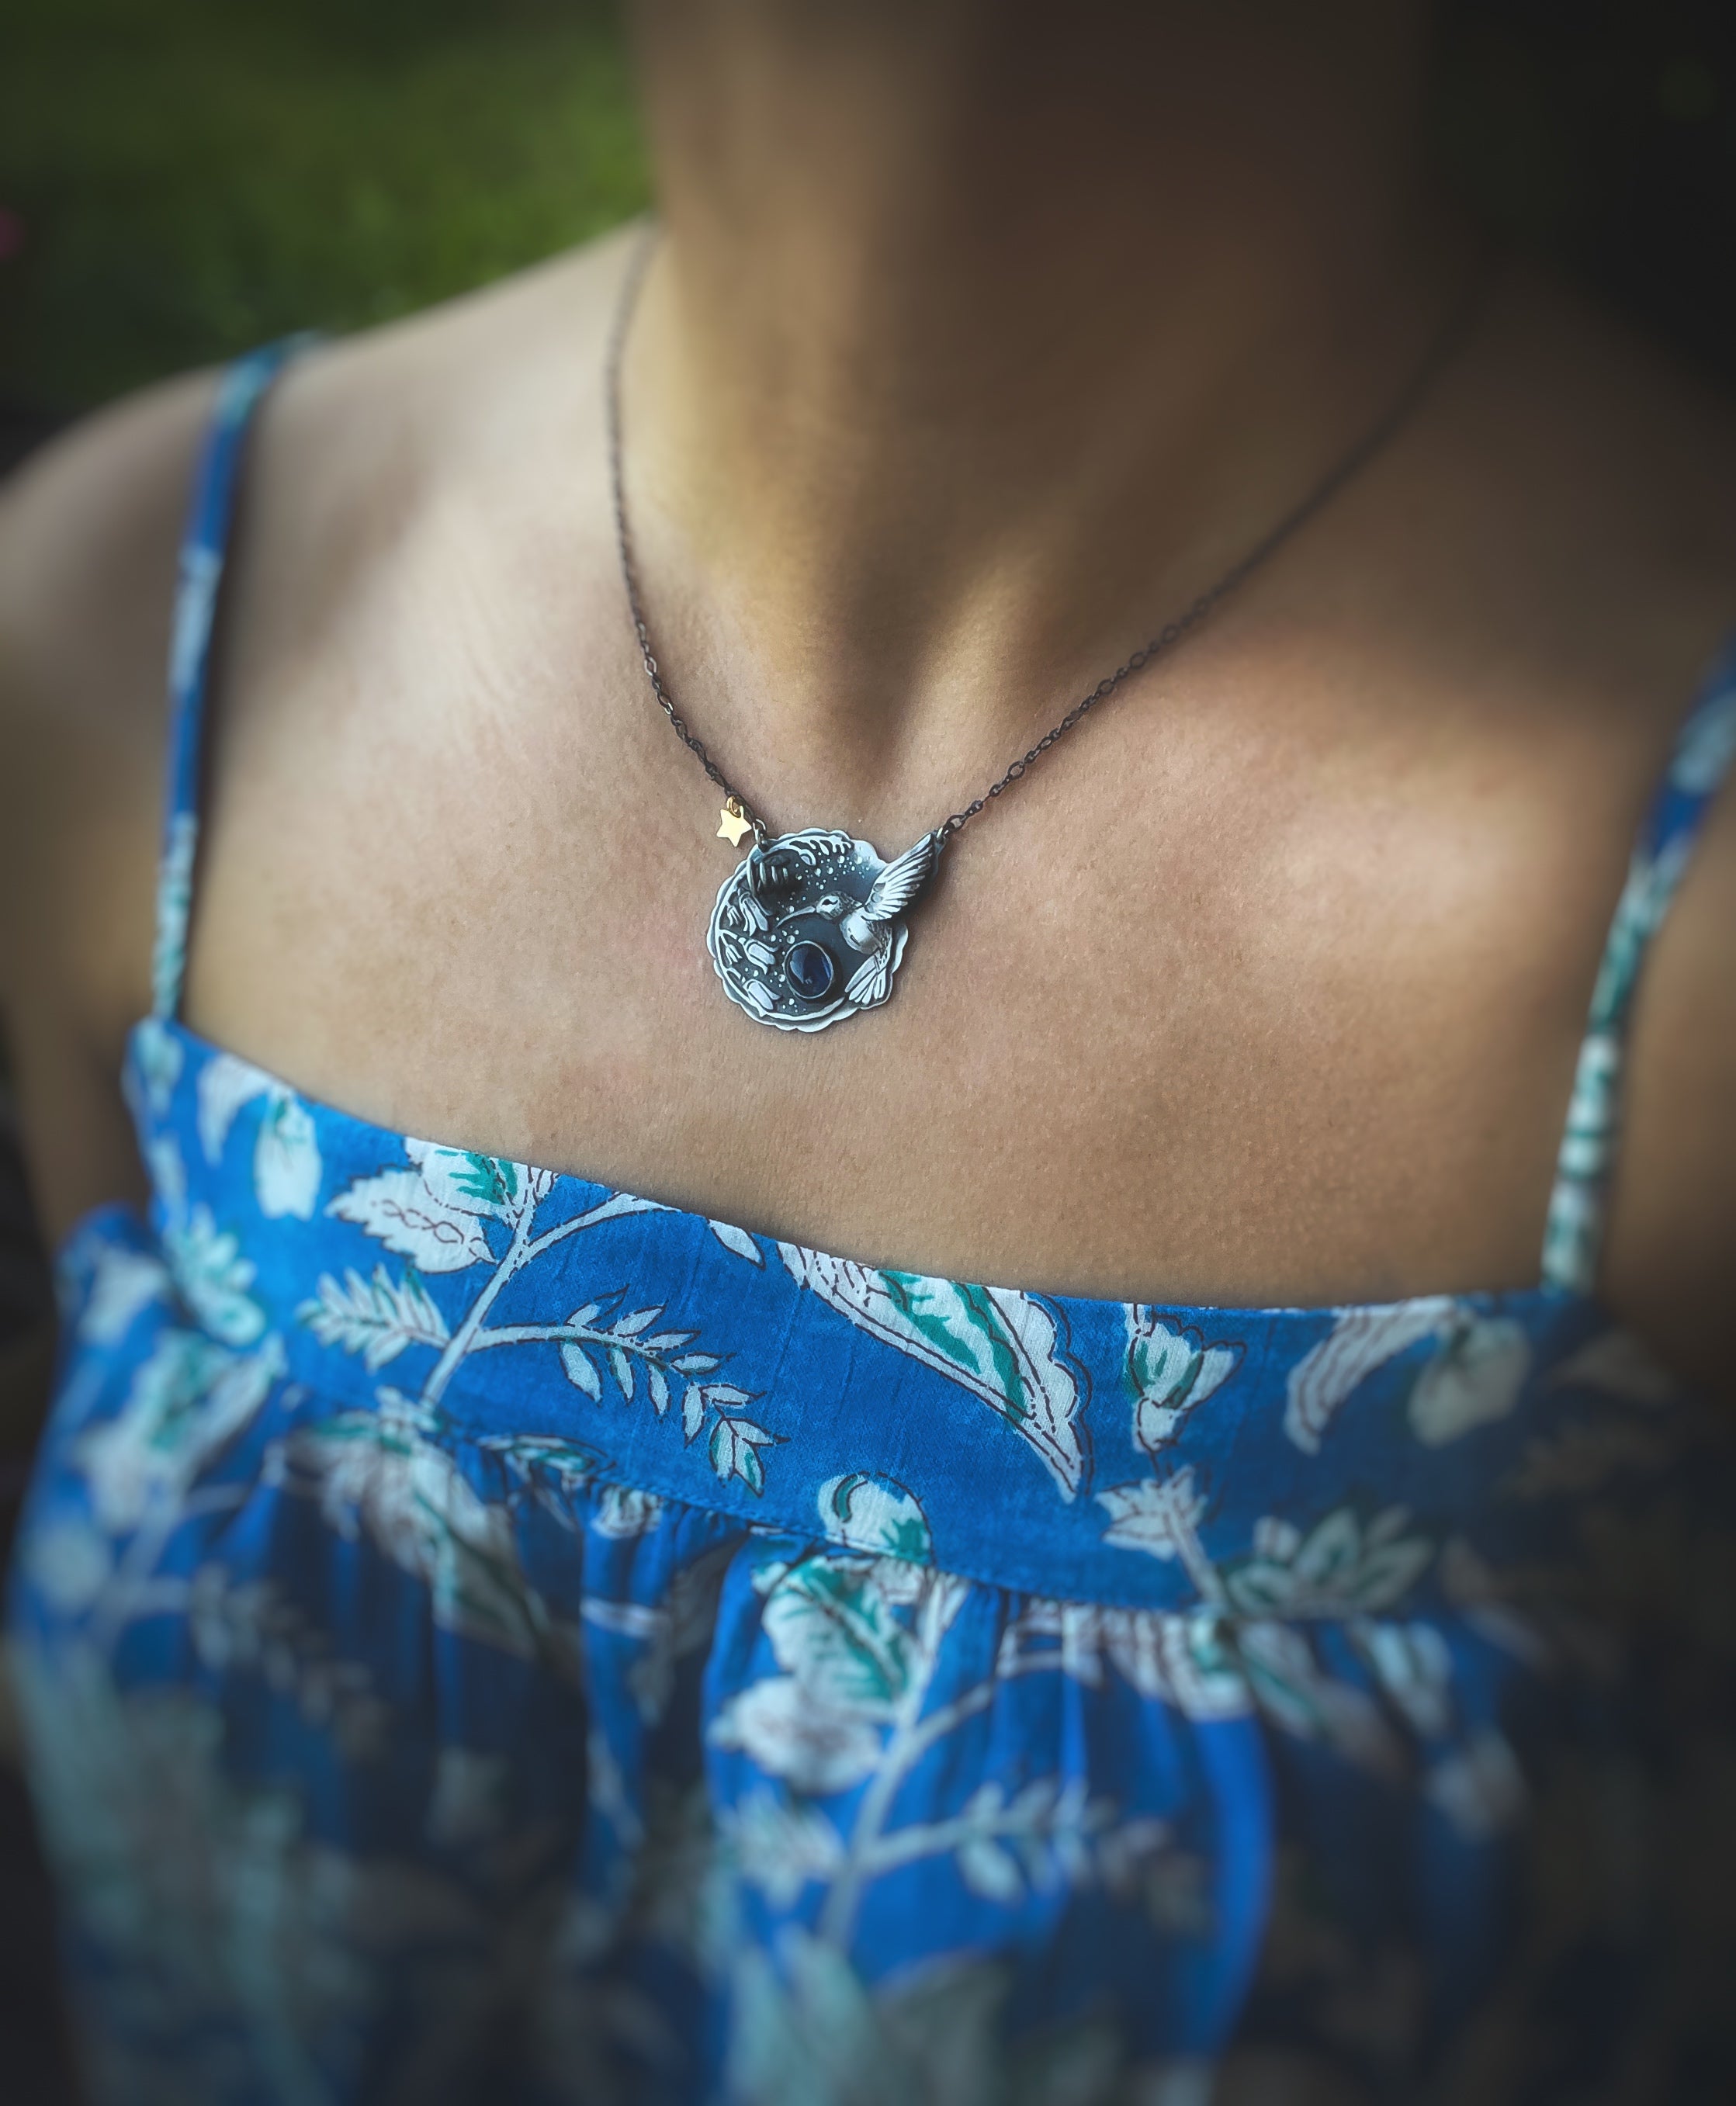 The Hummingbird & Bluebell Flowers Necklace I